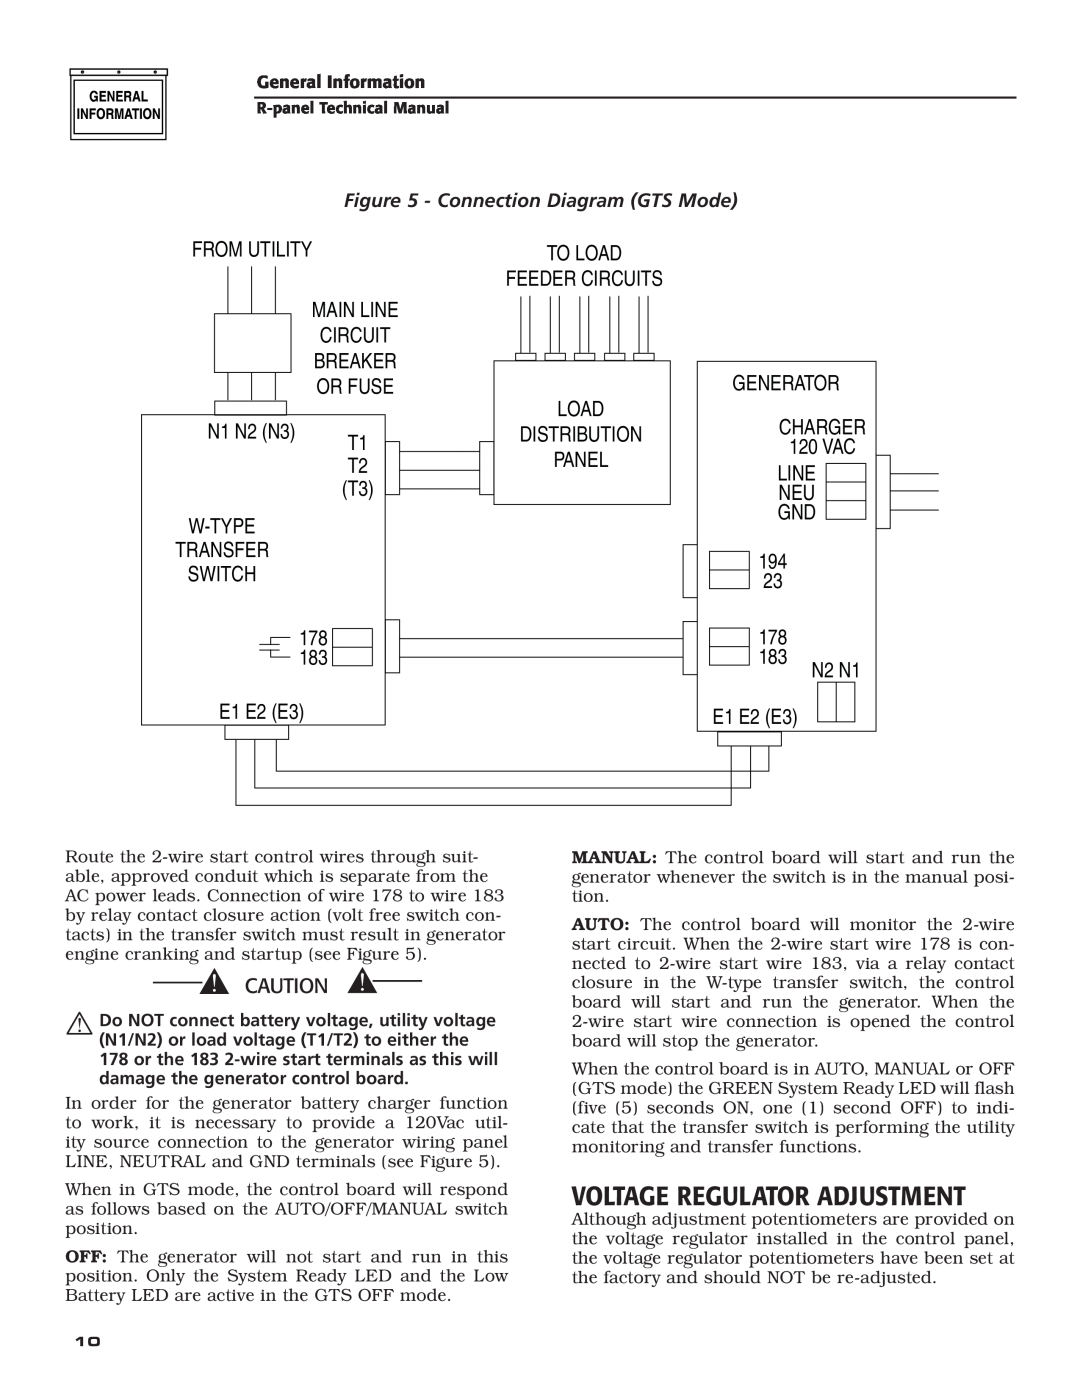 Generac Power Systems R-200A Voltage Regulator Adjustment, Connection Diagram GTS Mode, From Utility, N1 N2 N3, Main Line 